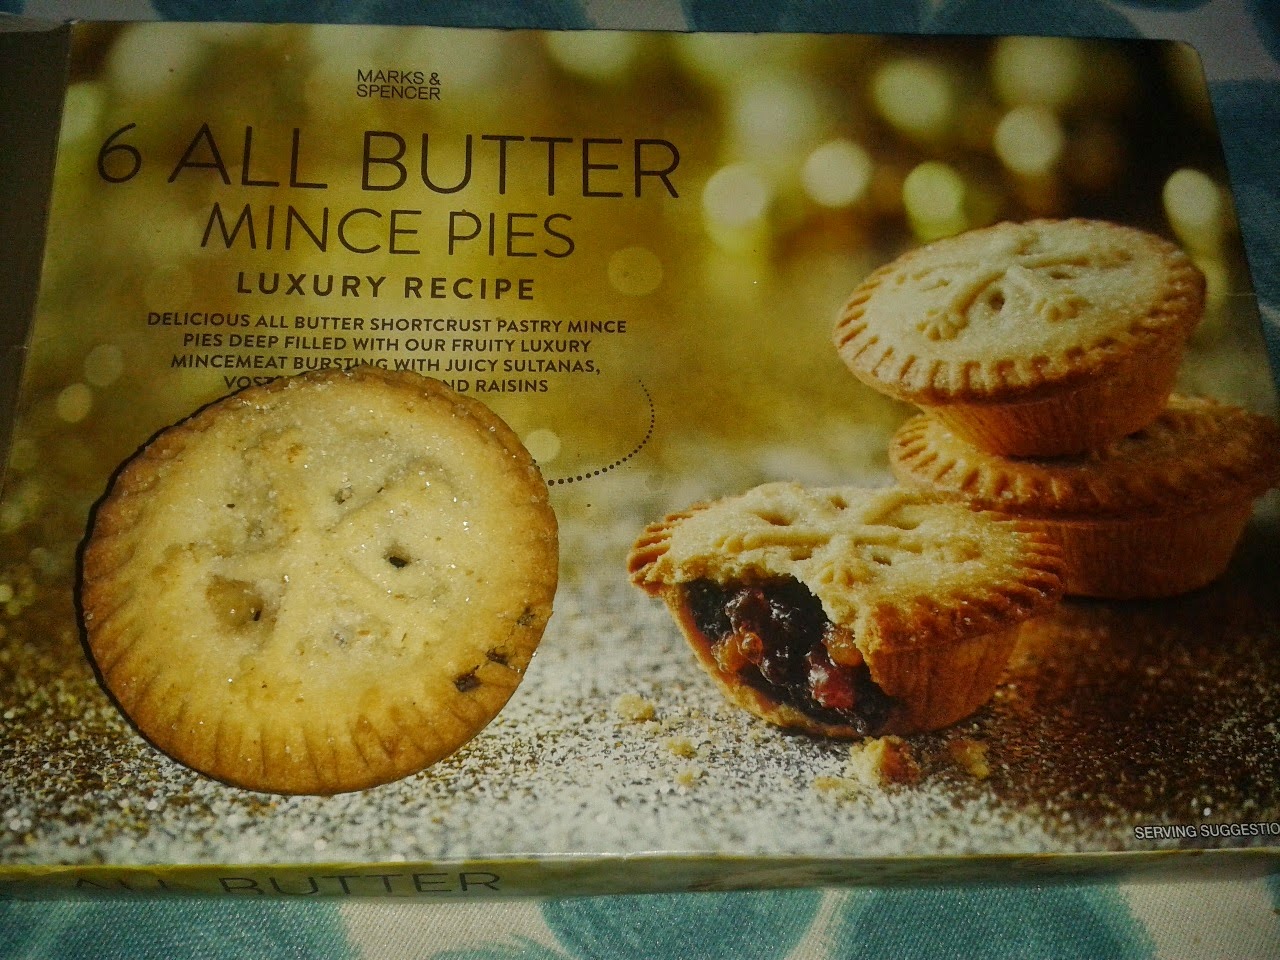 Marks and Spencer All Butter Luxury Mince Pies Review